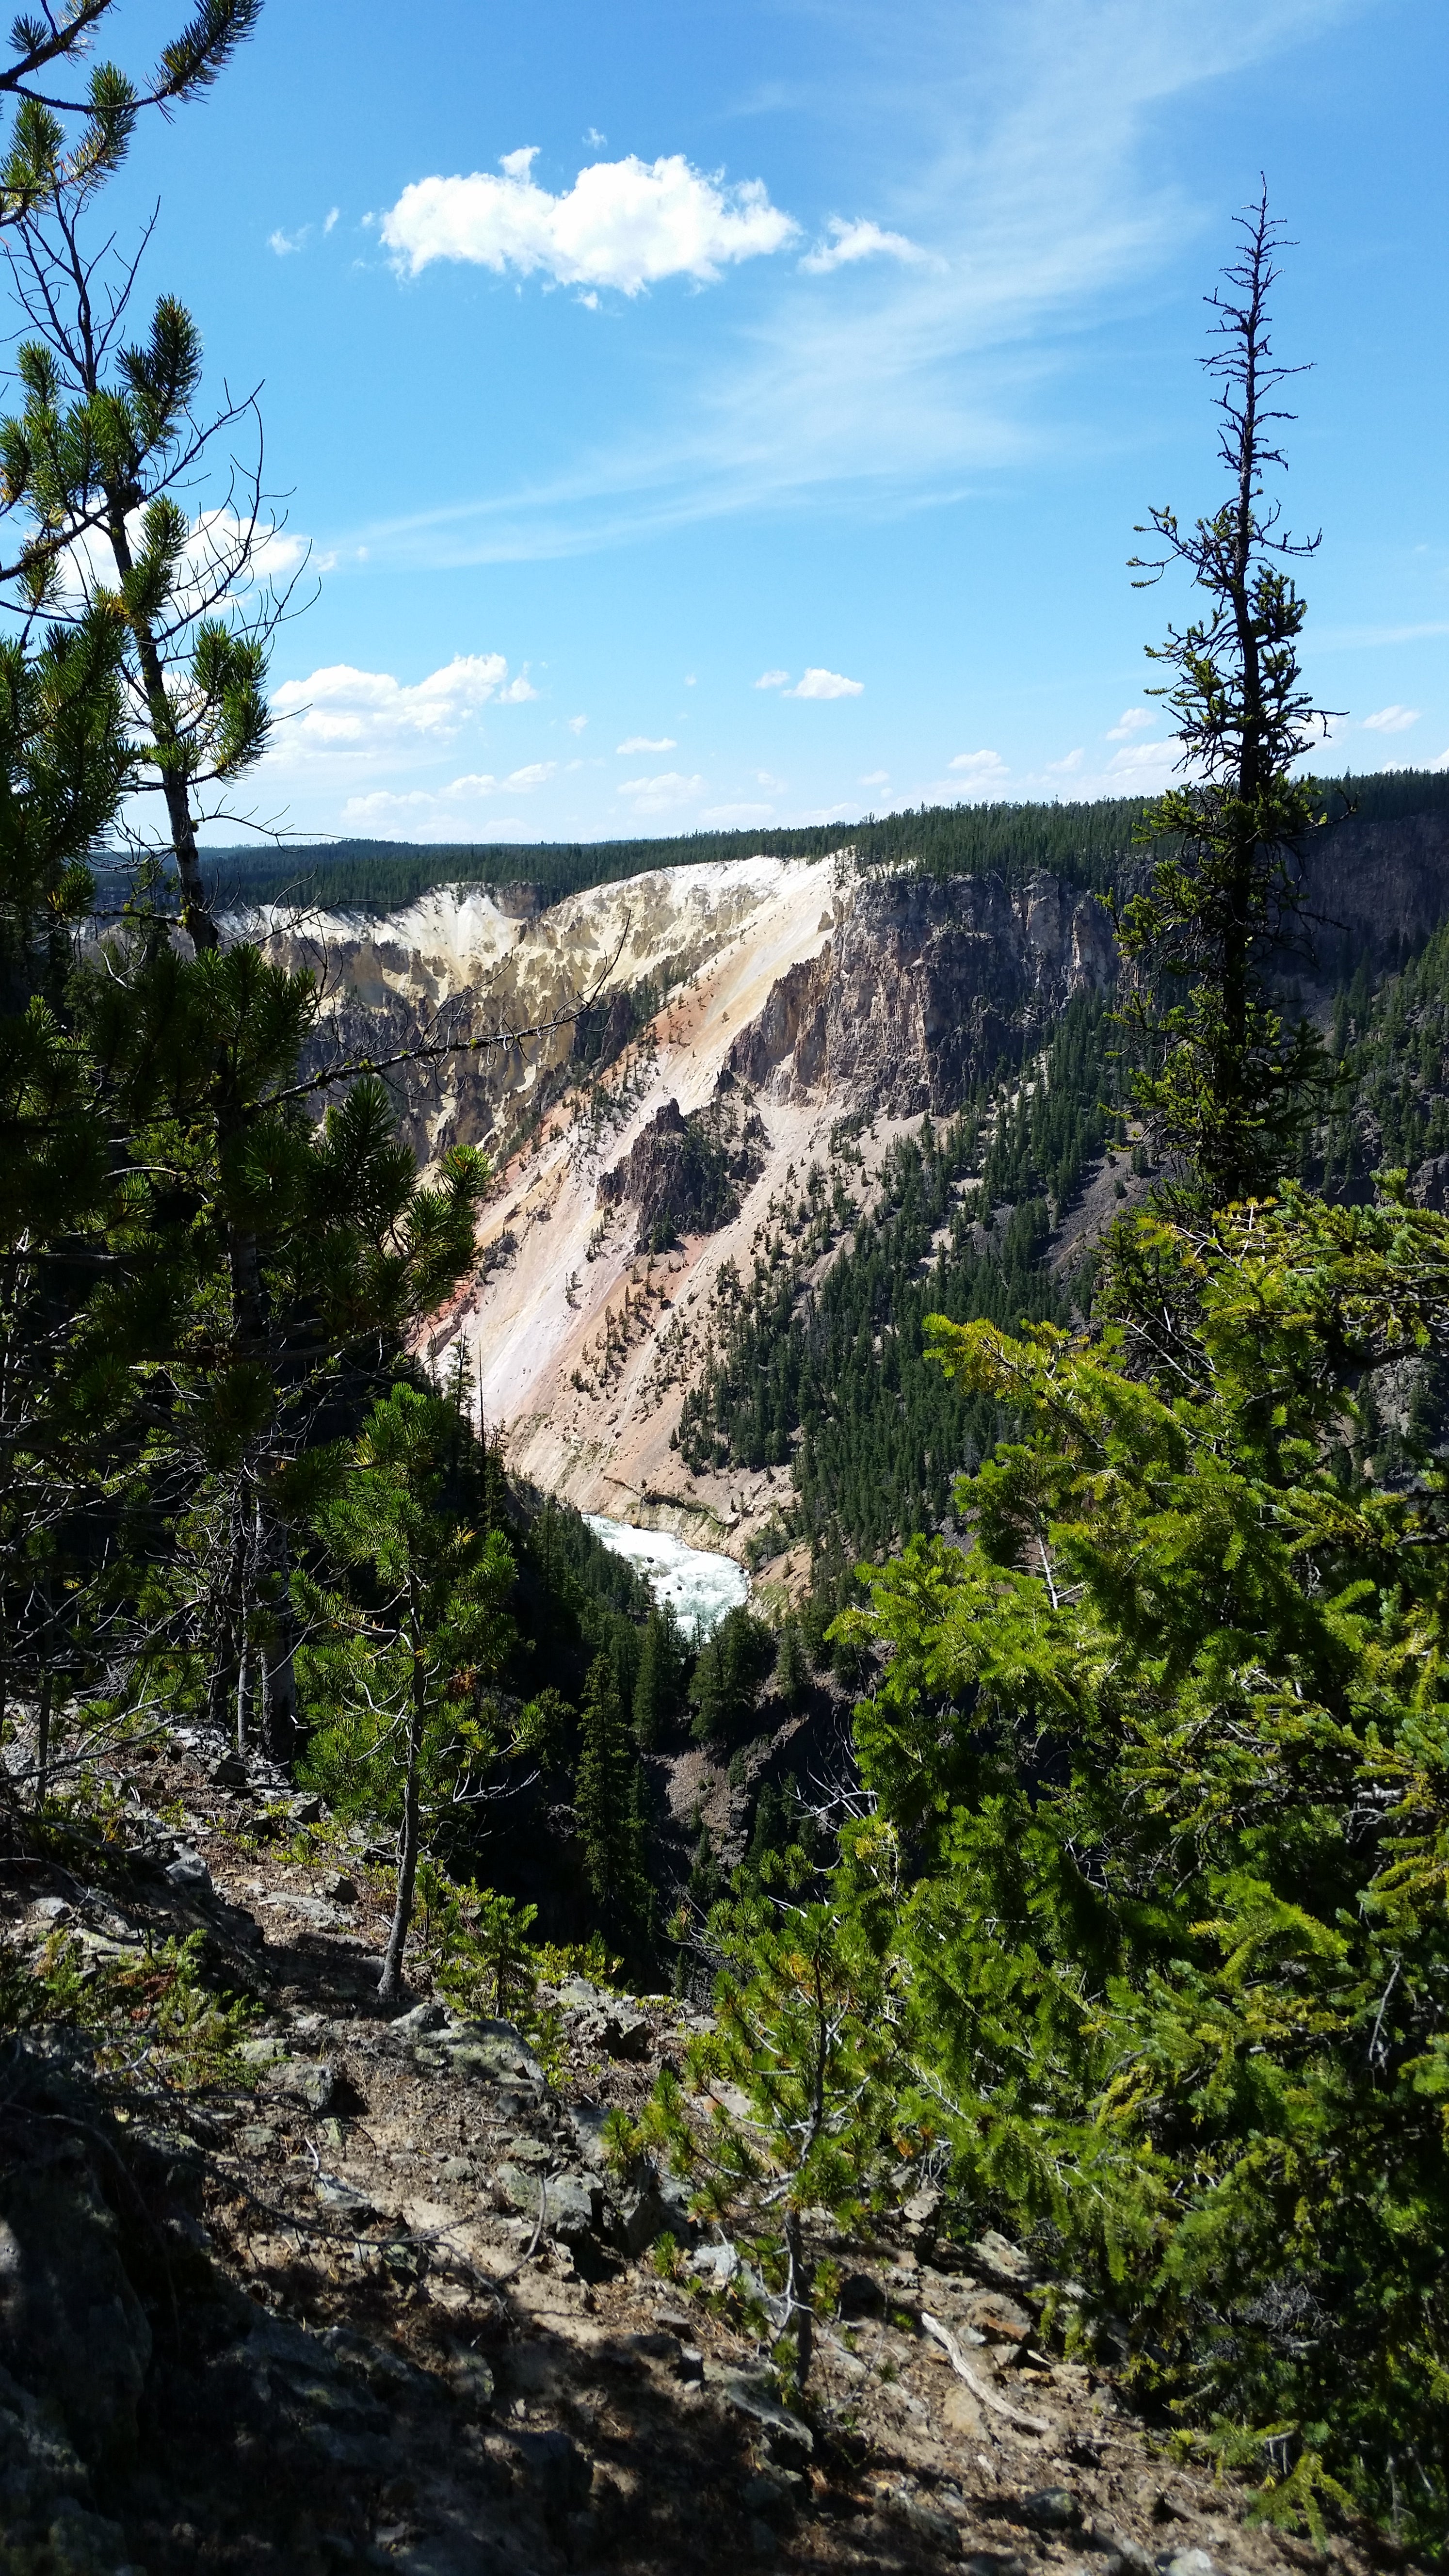 View of Grand Canyon of the Yellowstone just before campsite 4R2